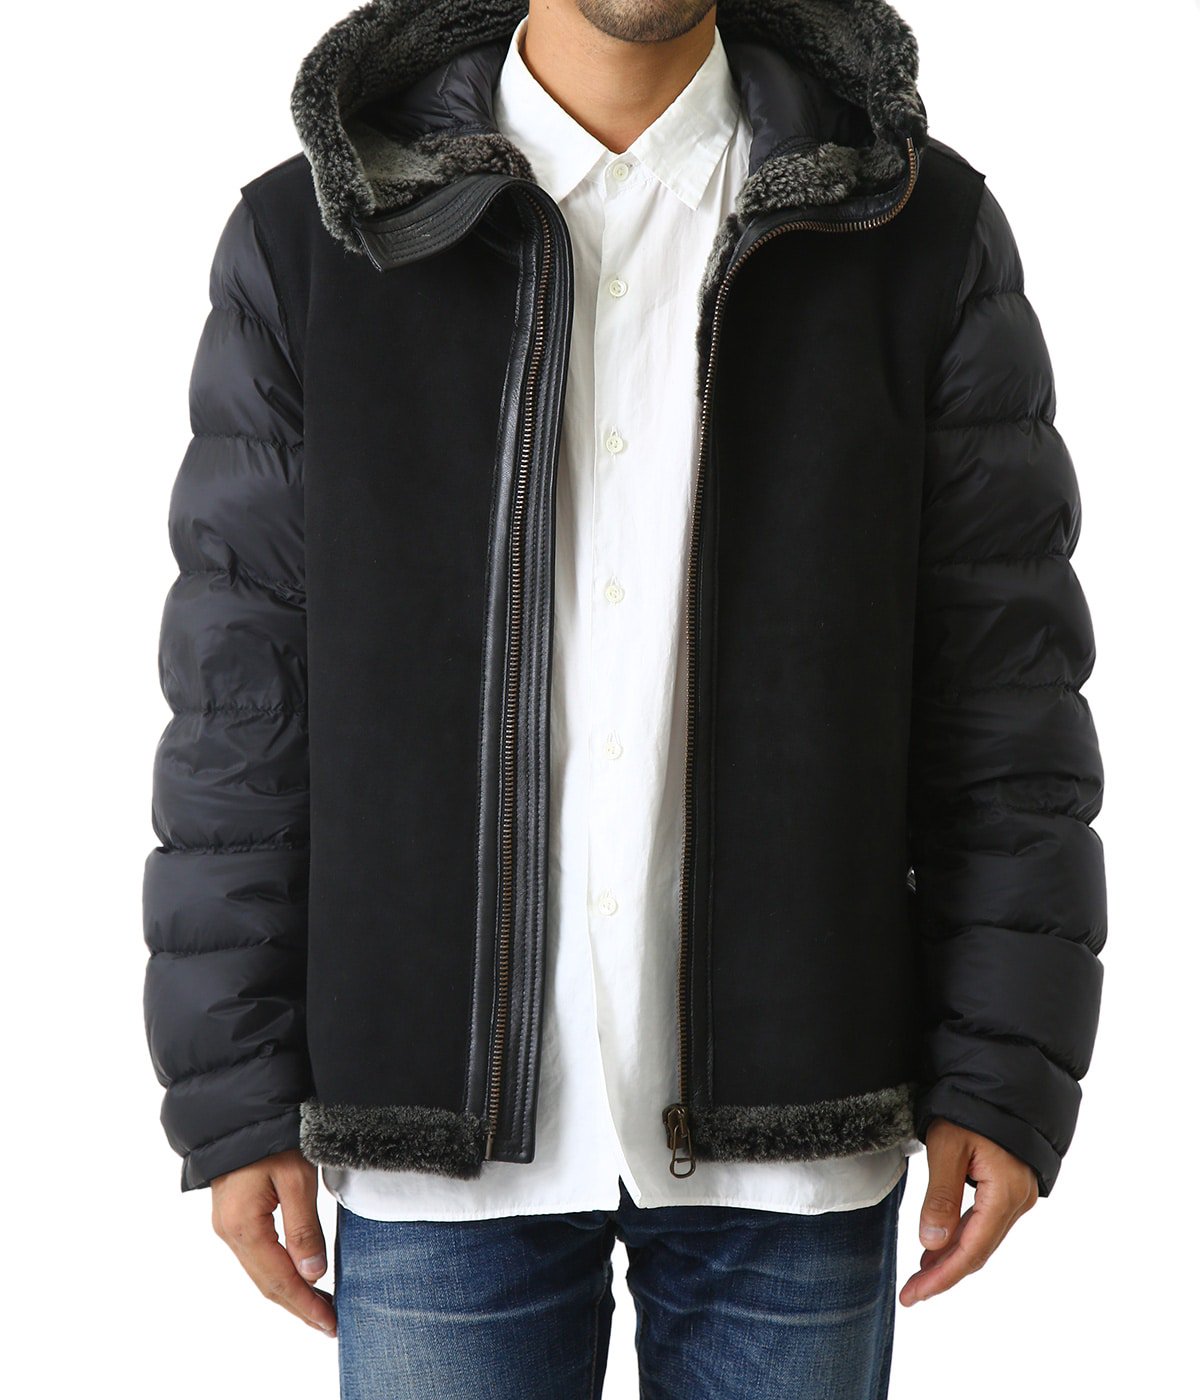 SHEARLING HOODED LINER WITH POCKET SHEARLING | Ten c(テンシー